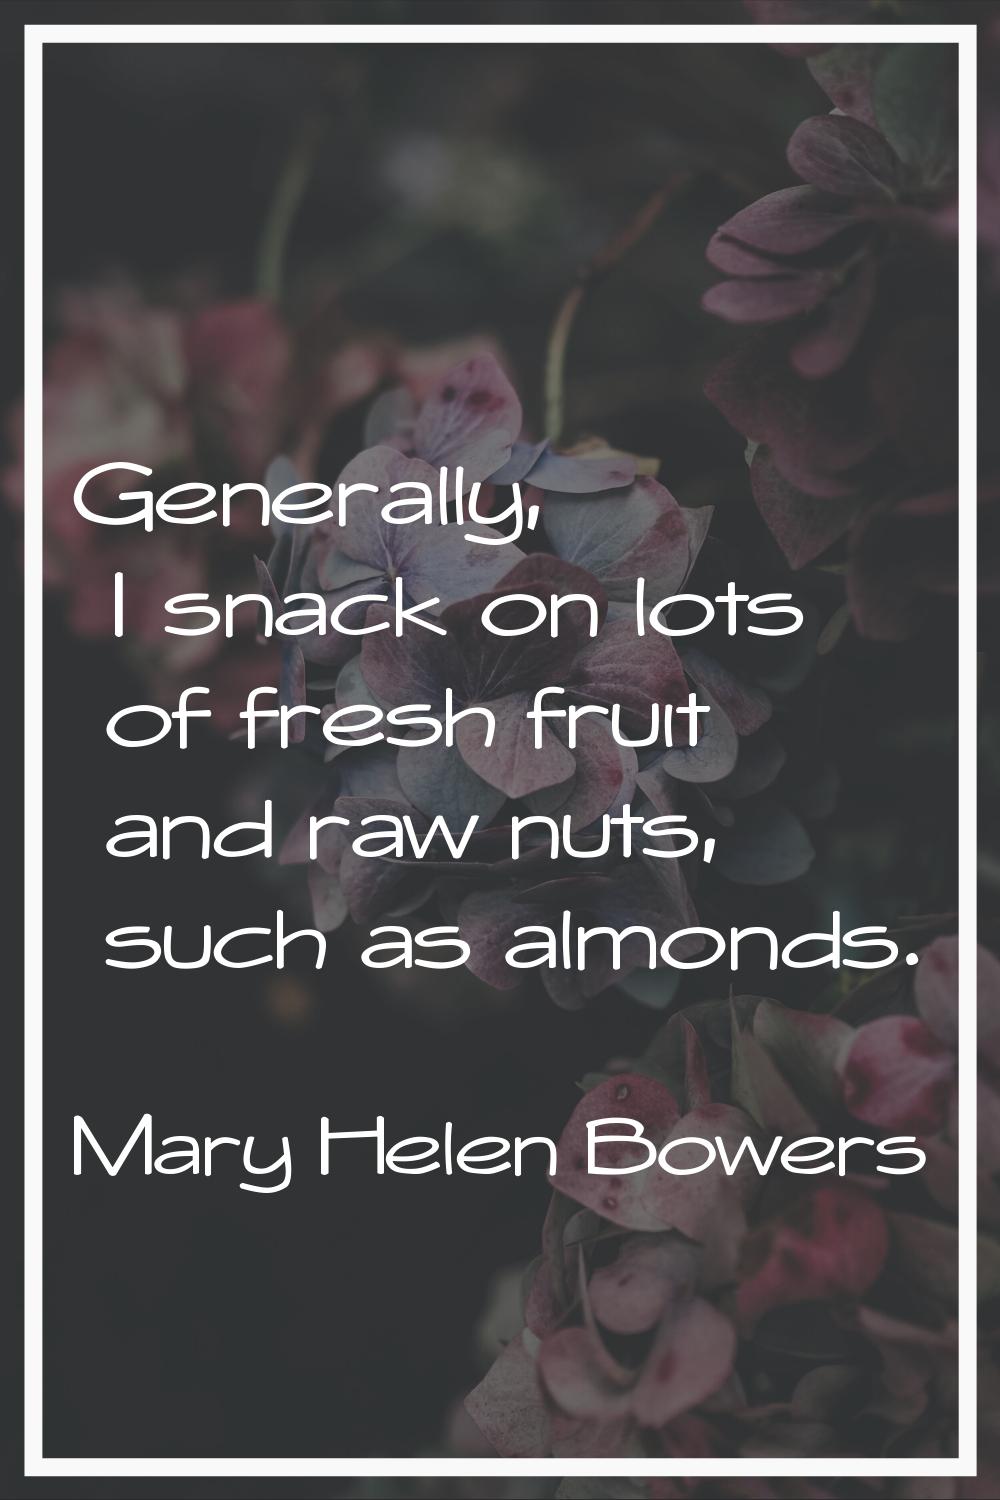 Generally, I snack on lots of fresh fruit and raw nuts, such as almonds.